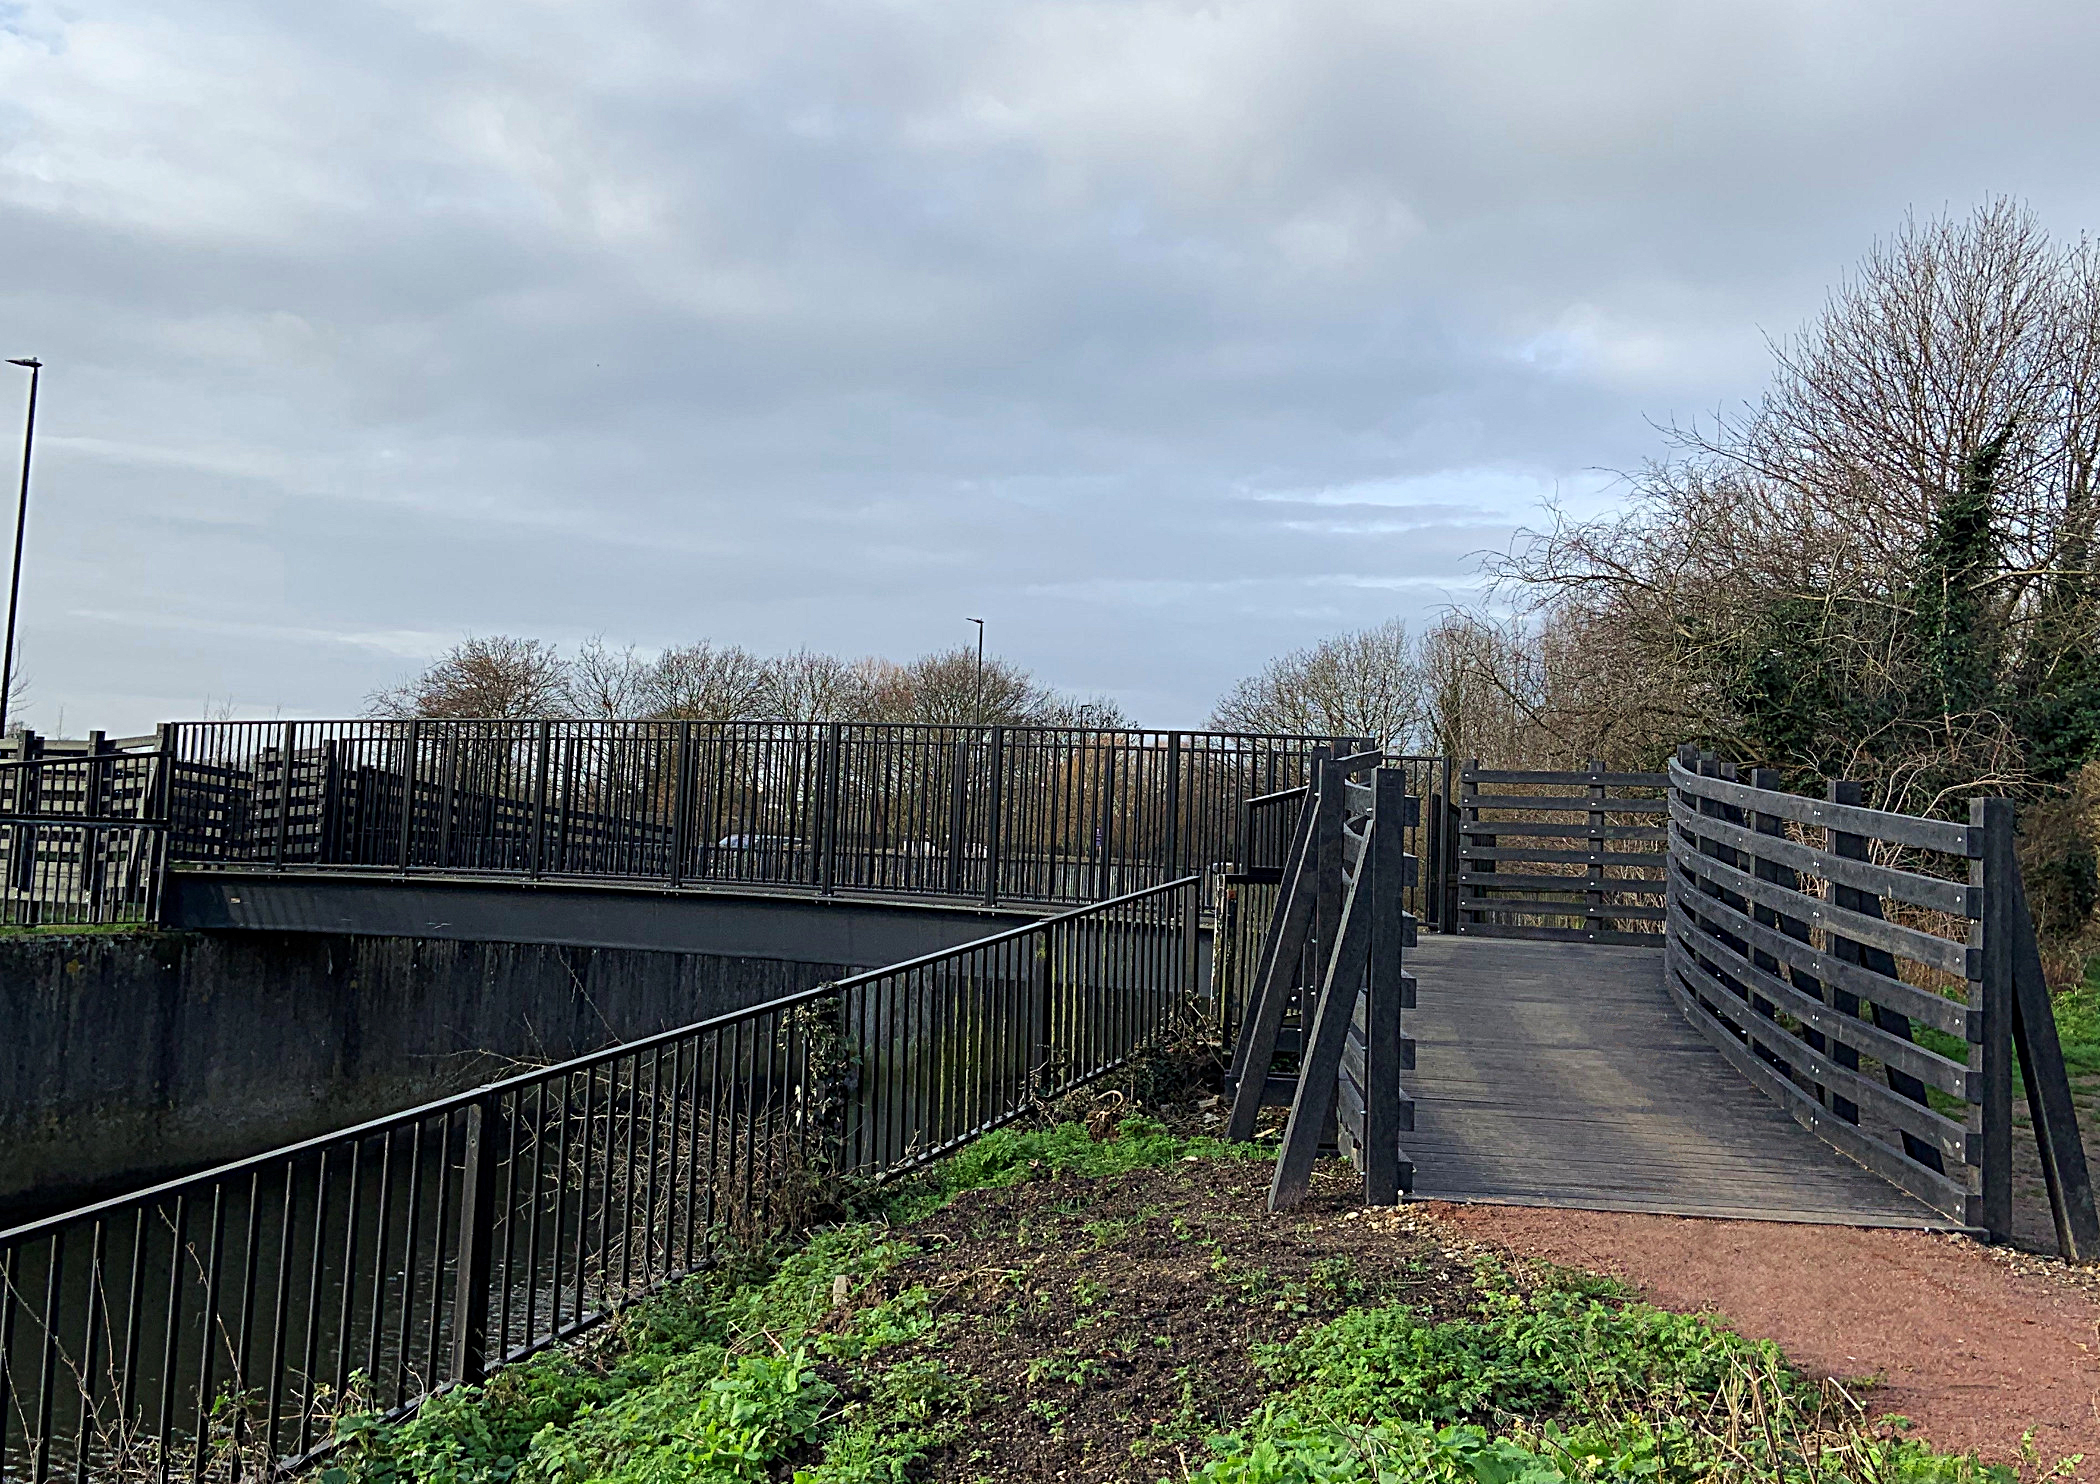 ECS Engineering Services has installed a public access bridge in Greenford, West London, manufactured in fibre reinforced polymer (FRP).